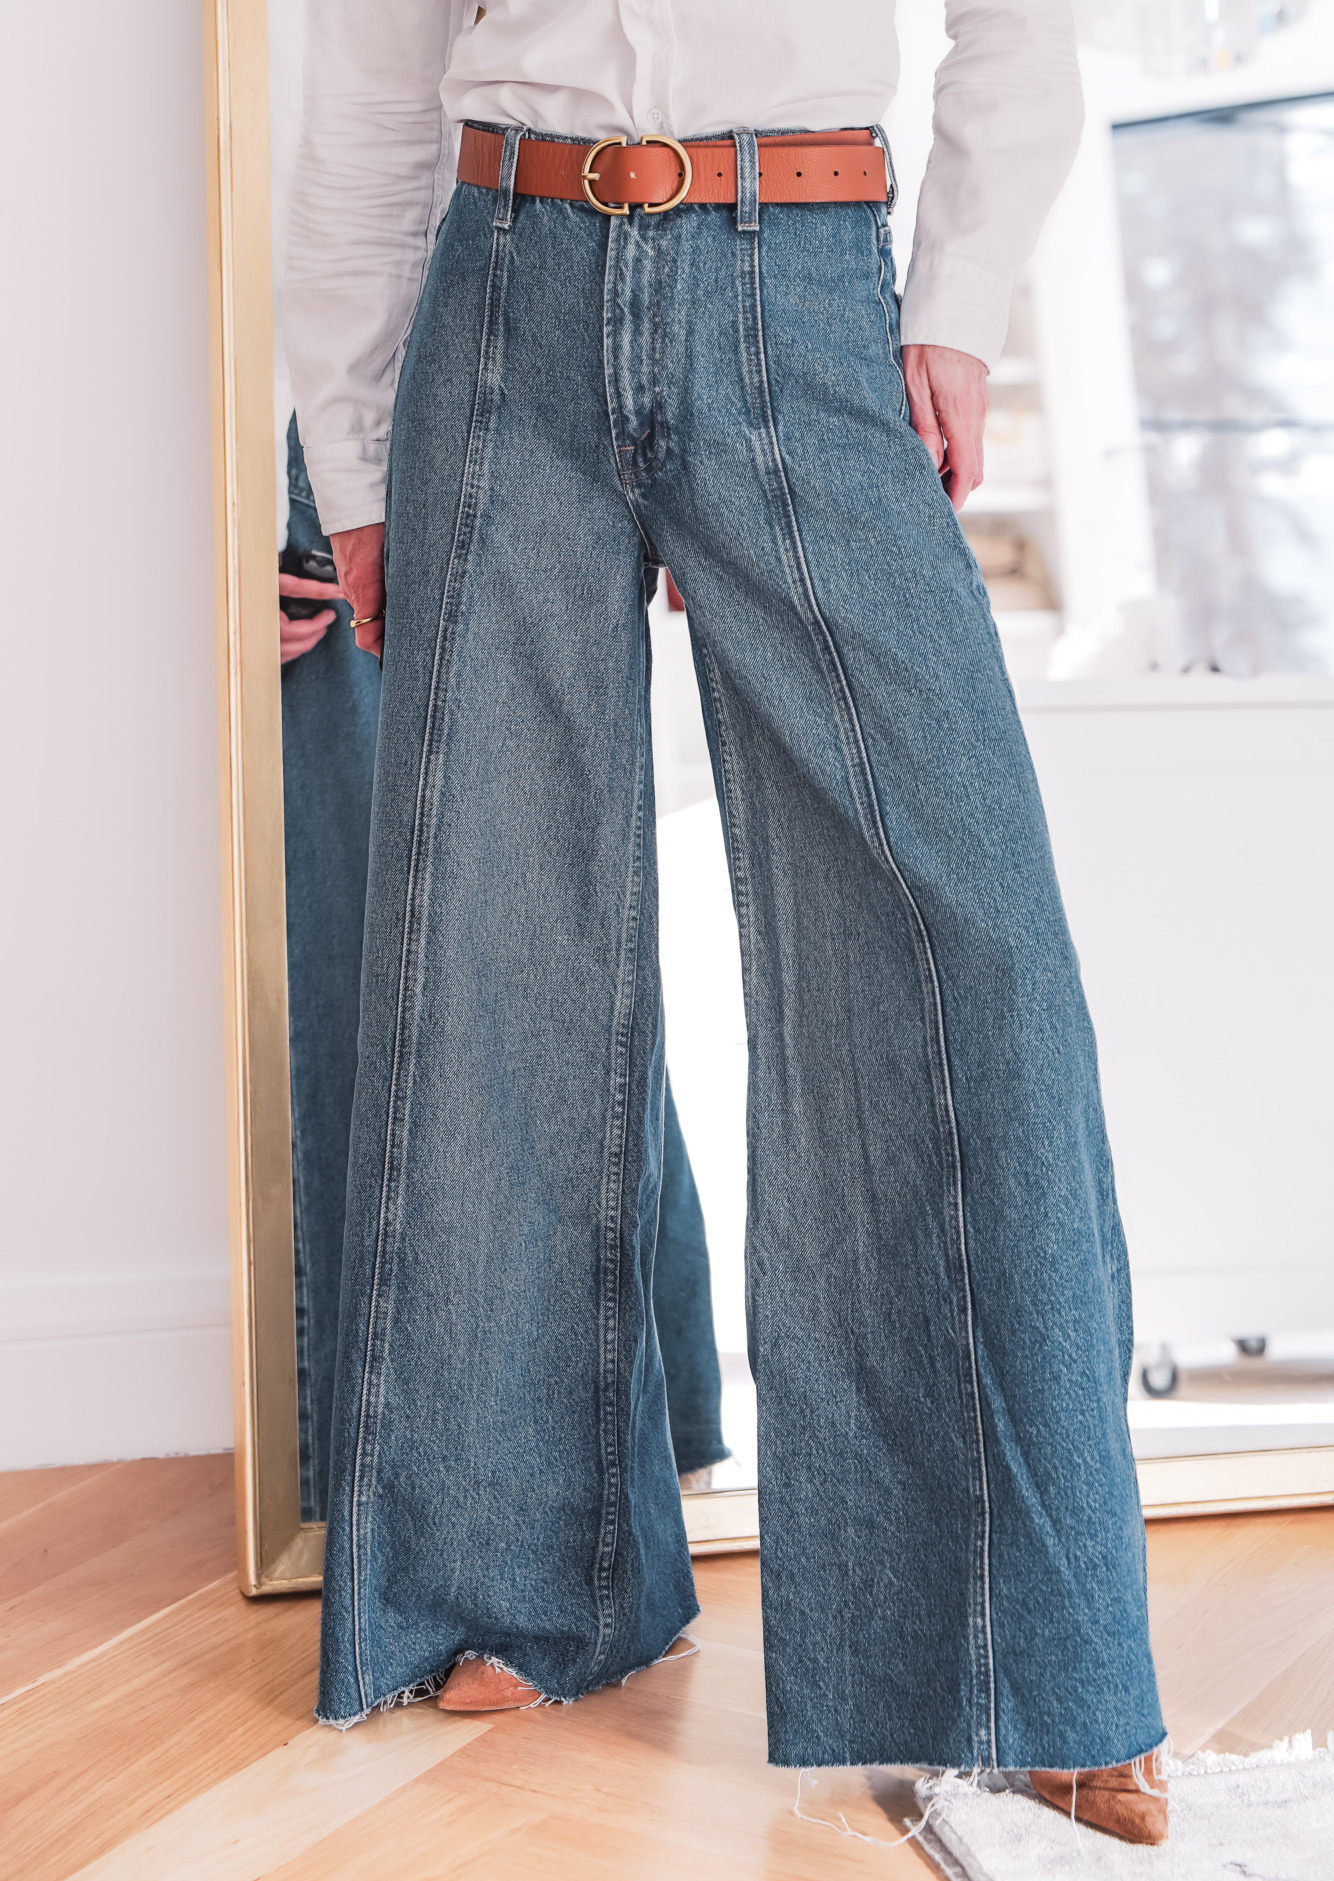 Baggy Jeans outfit for women